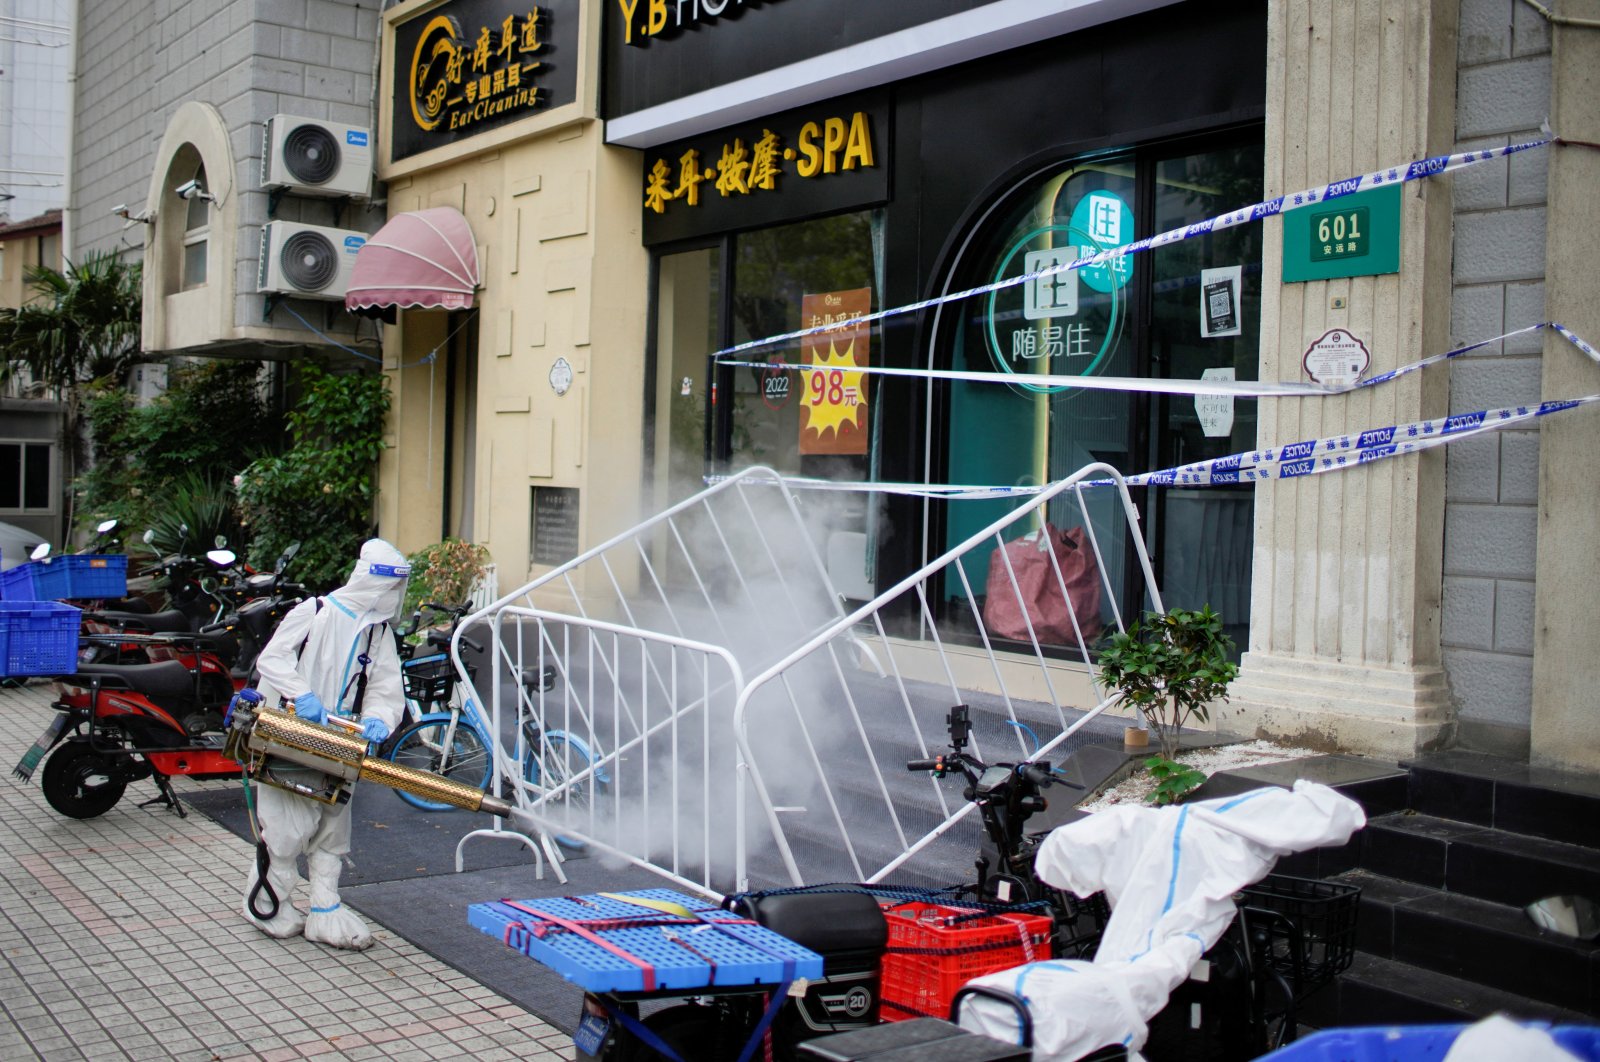 A worker in a protective suit disinfects a street during lockdown amid COVID-19 outbreak, Shanghai, China, May 20, 2022. (Reuters Photo)